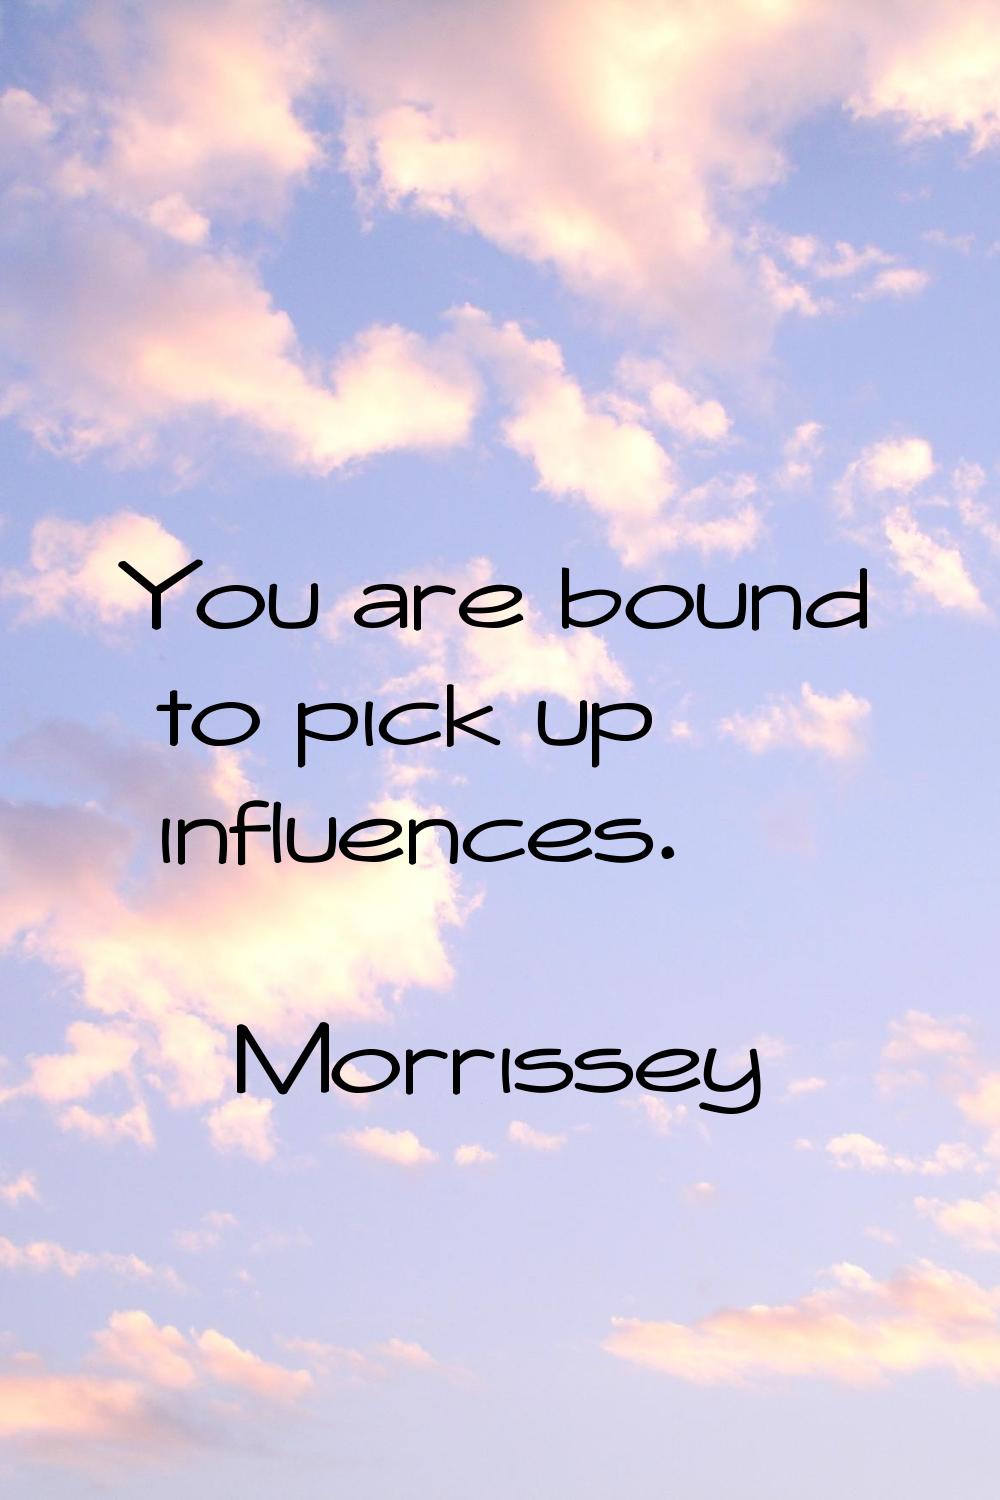 You are bound to pick up influences.